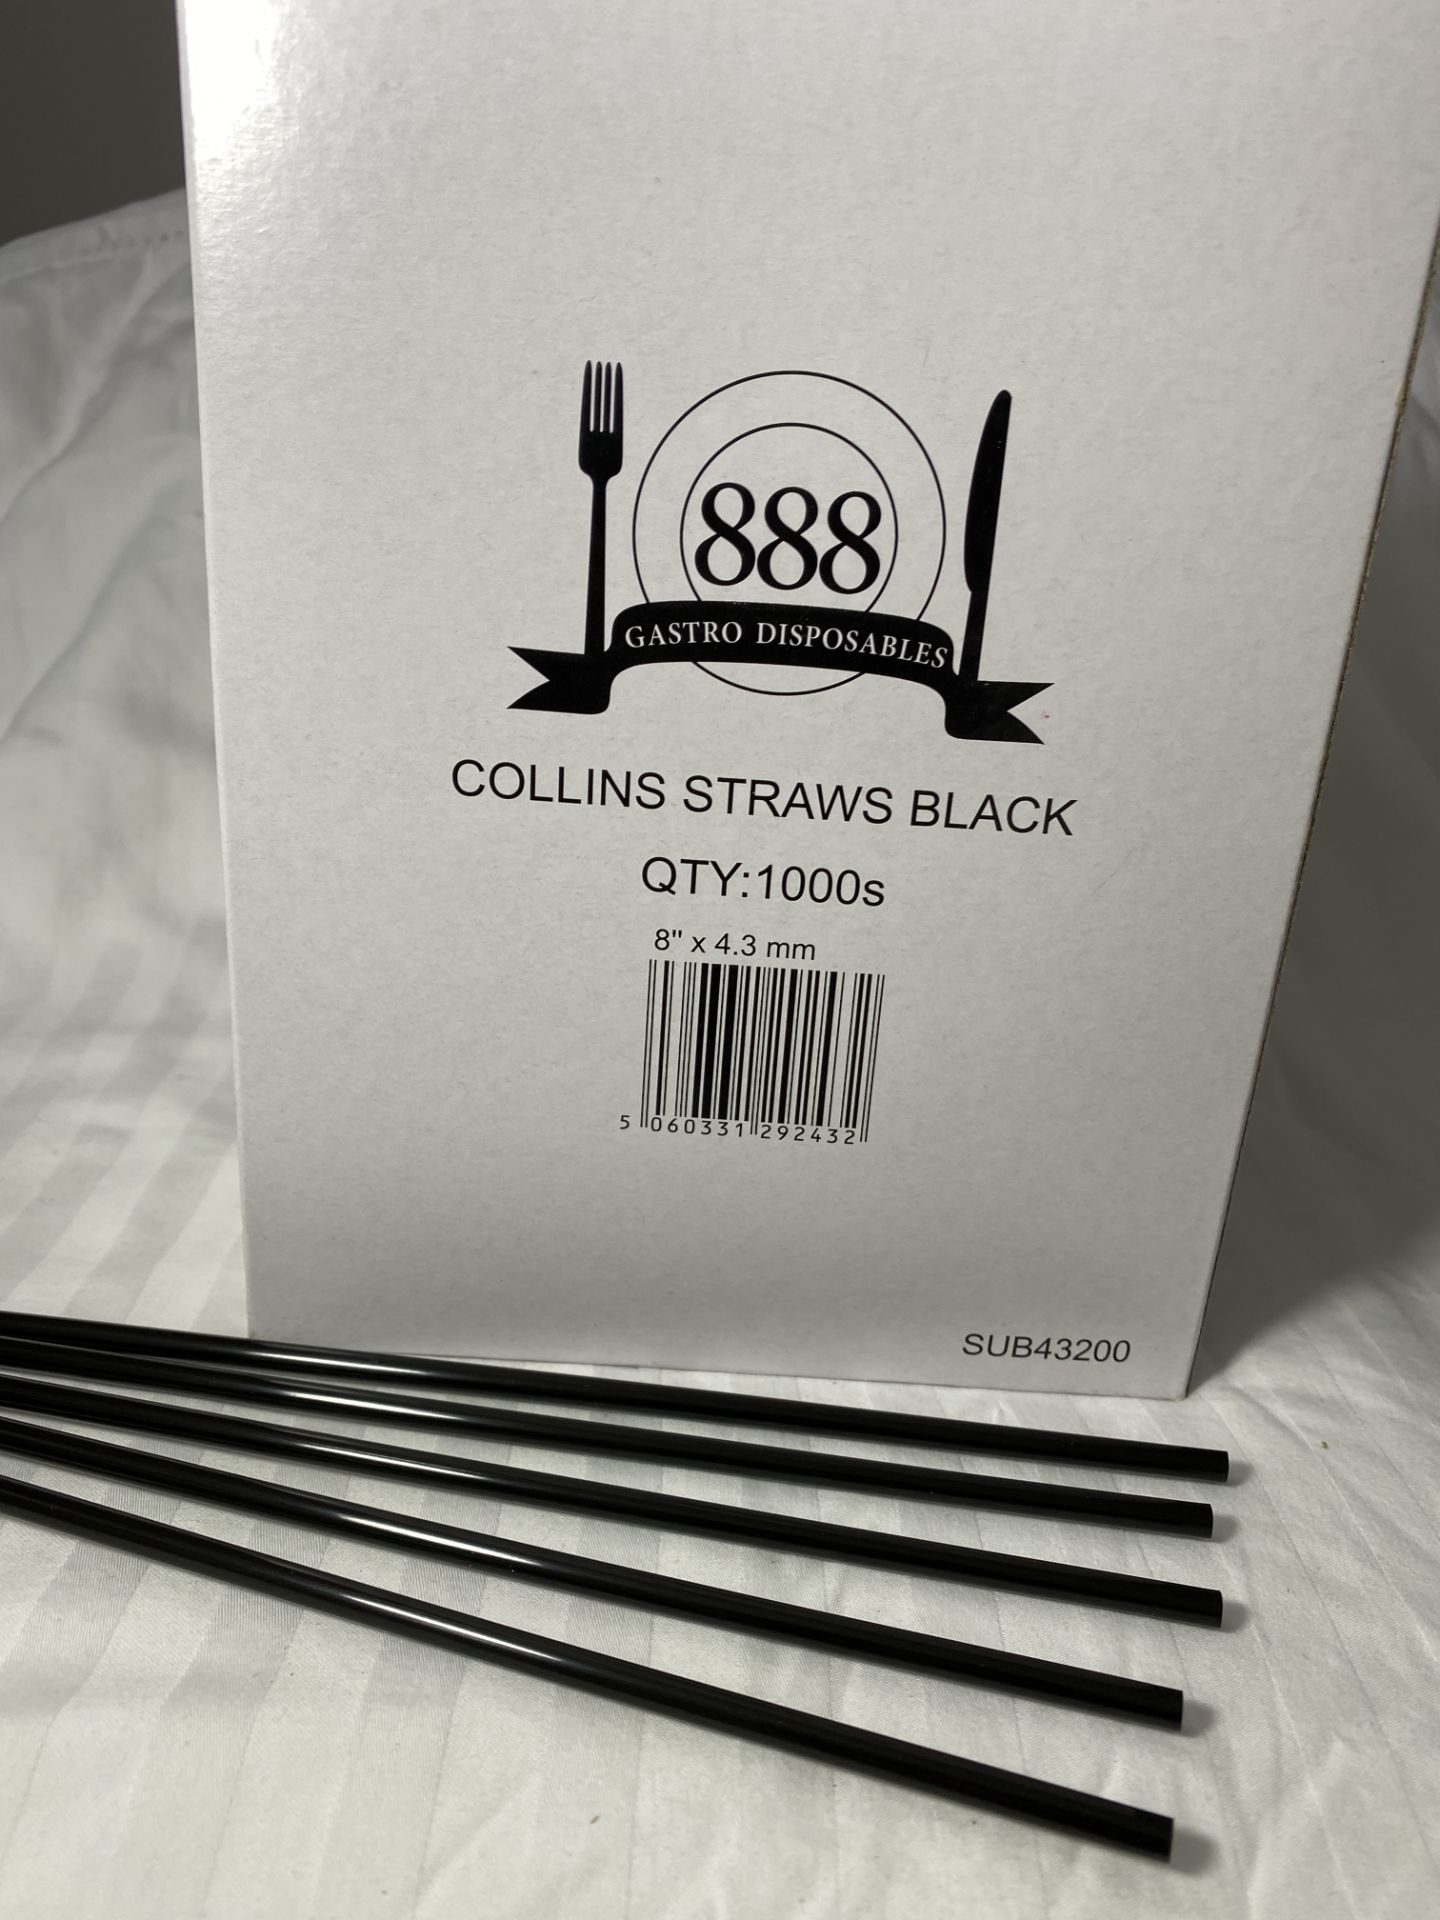 5 x Boxes of Collins Straws by 888 Gastro Disposables - Image 5 of 6